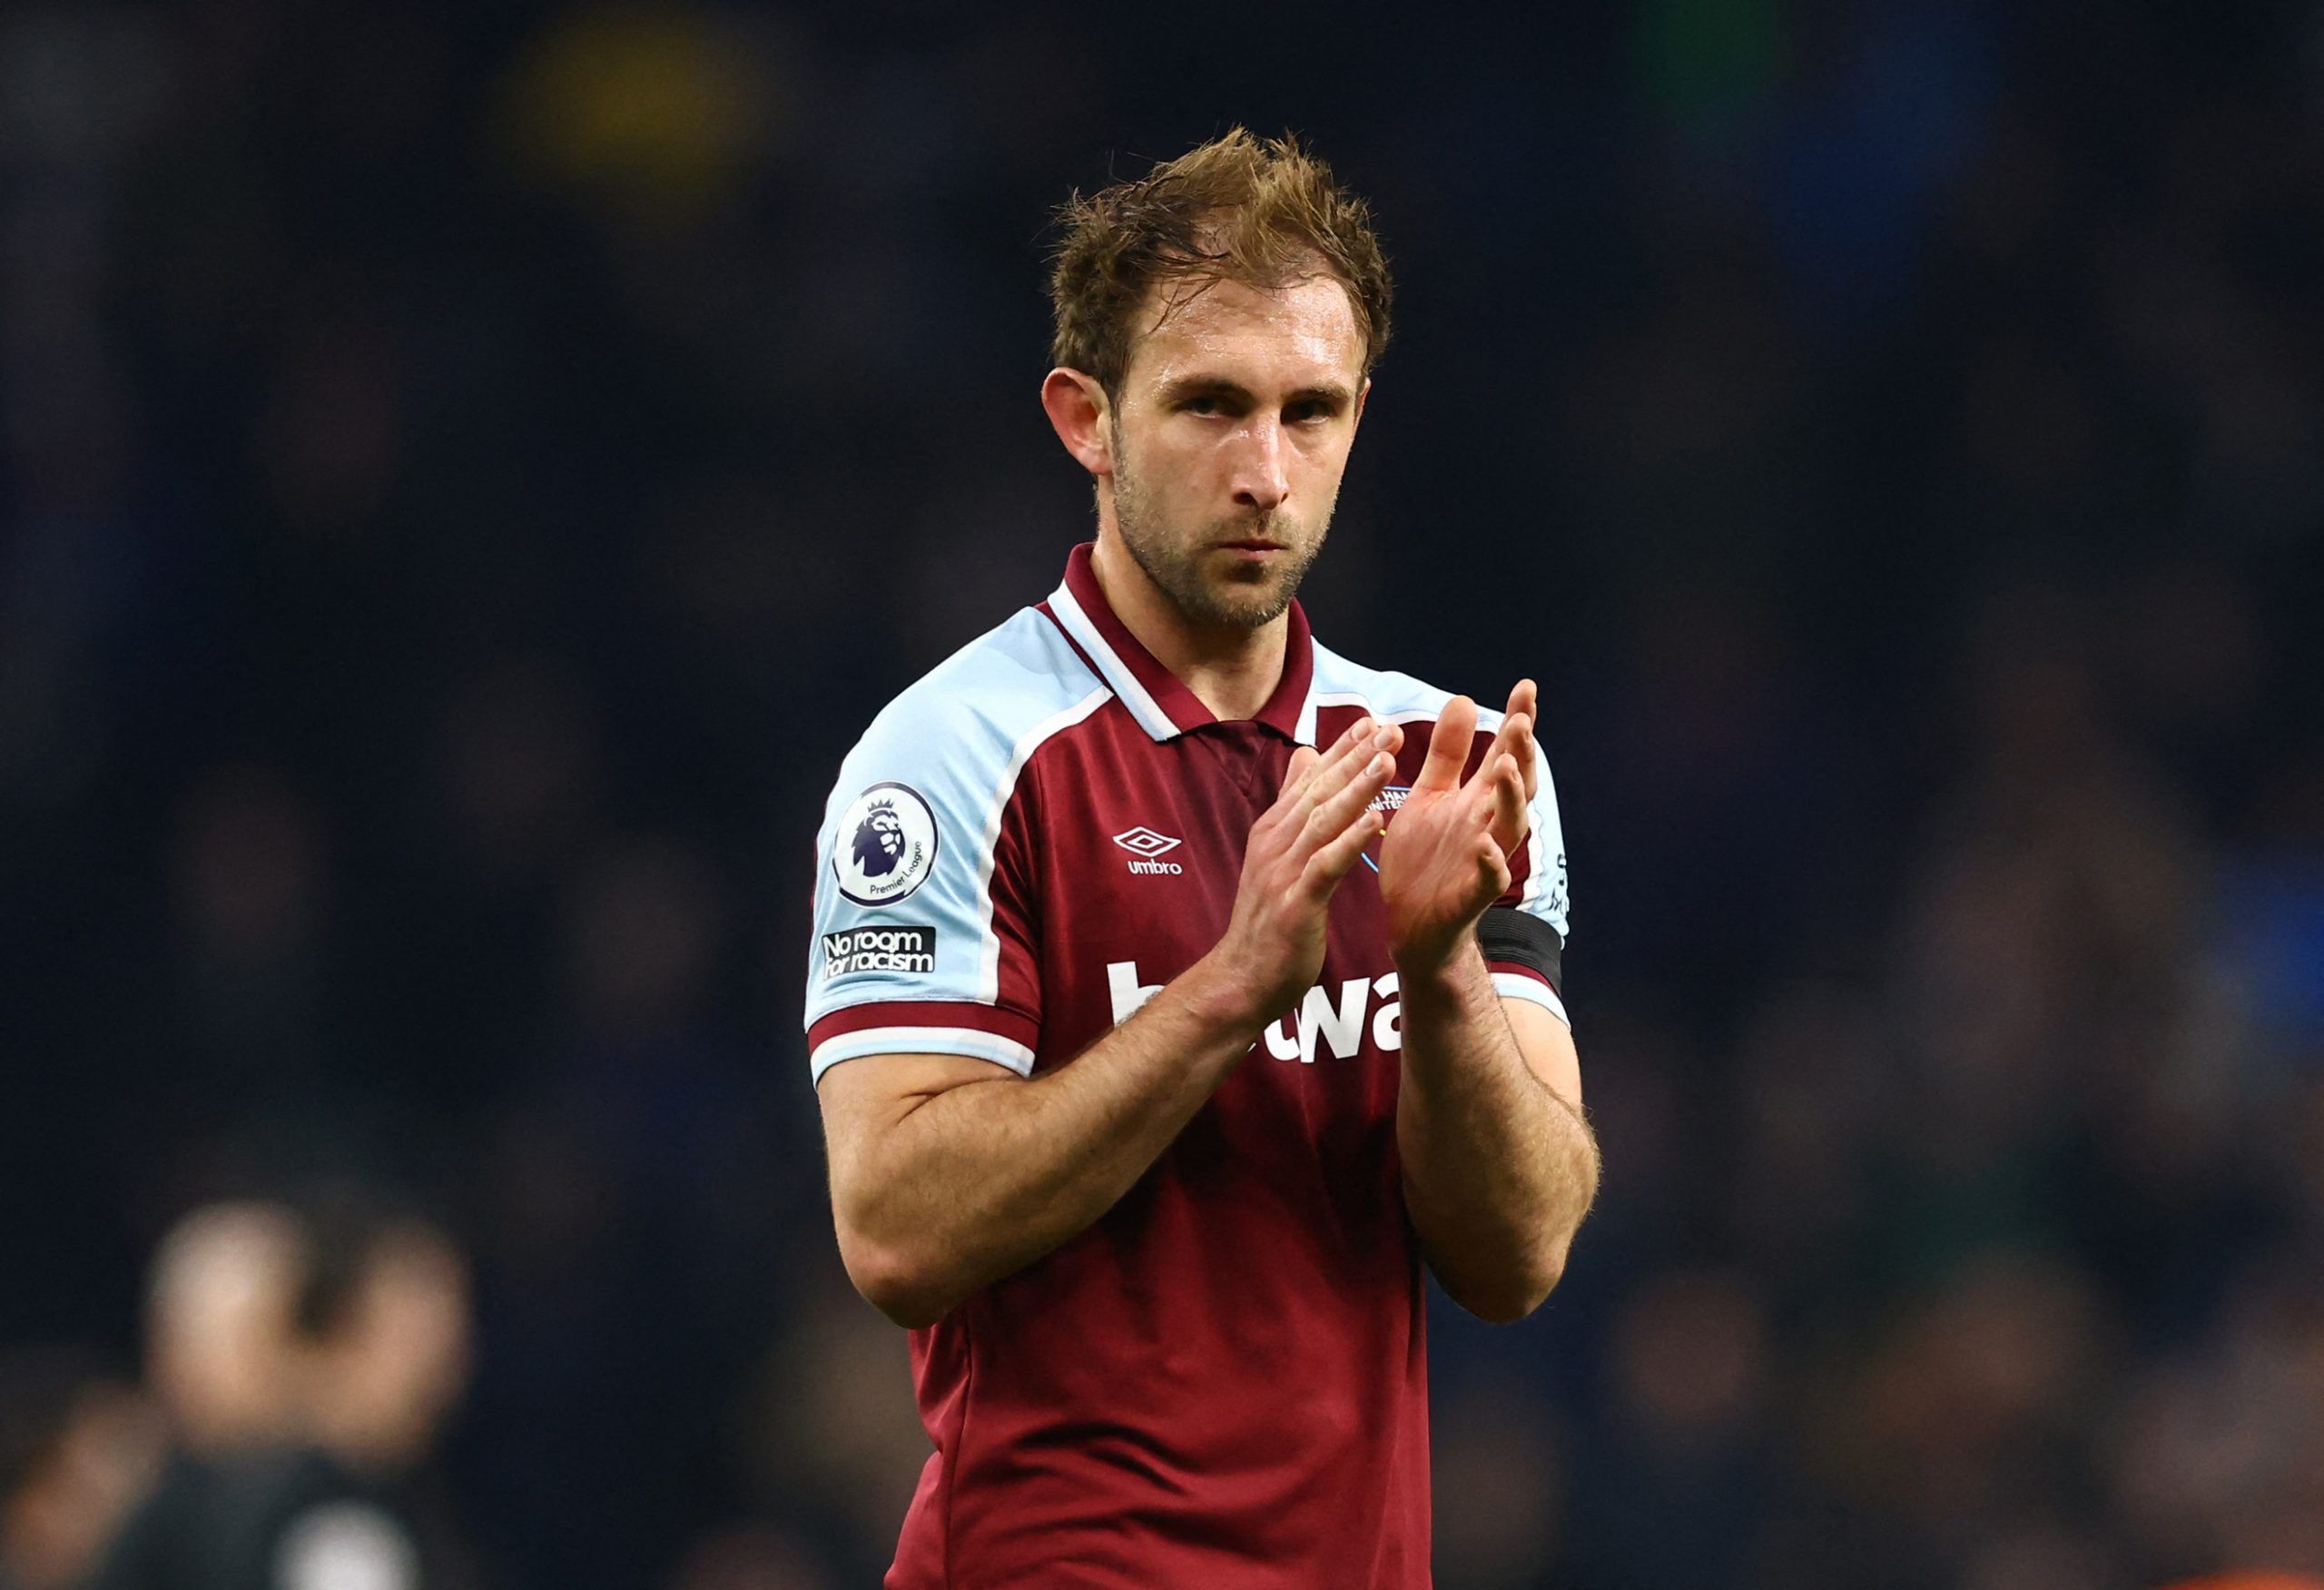 West Ham: Irons now ‘open minded’ over Craig Dawson future -Follow up